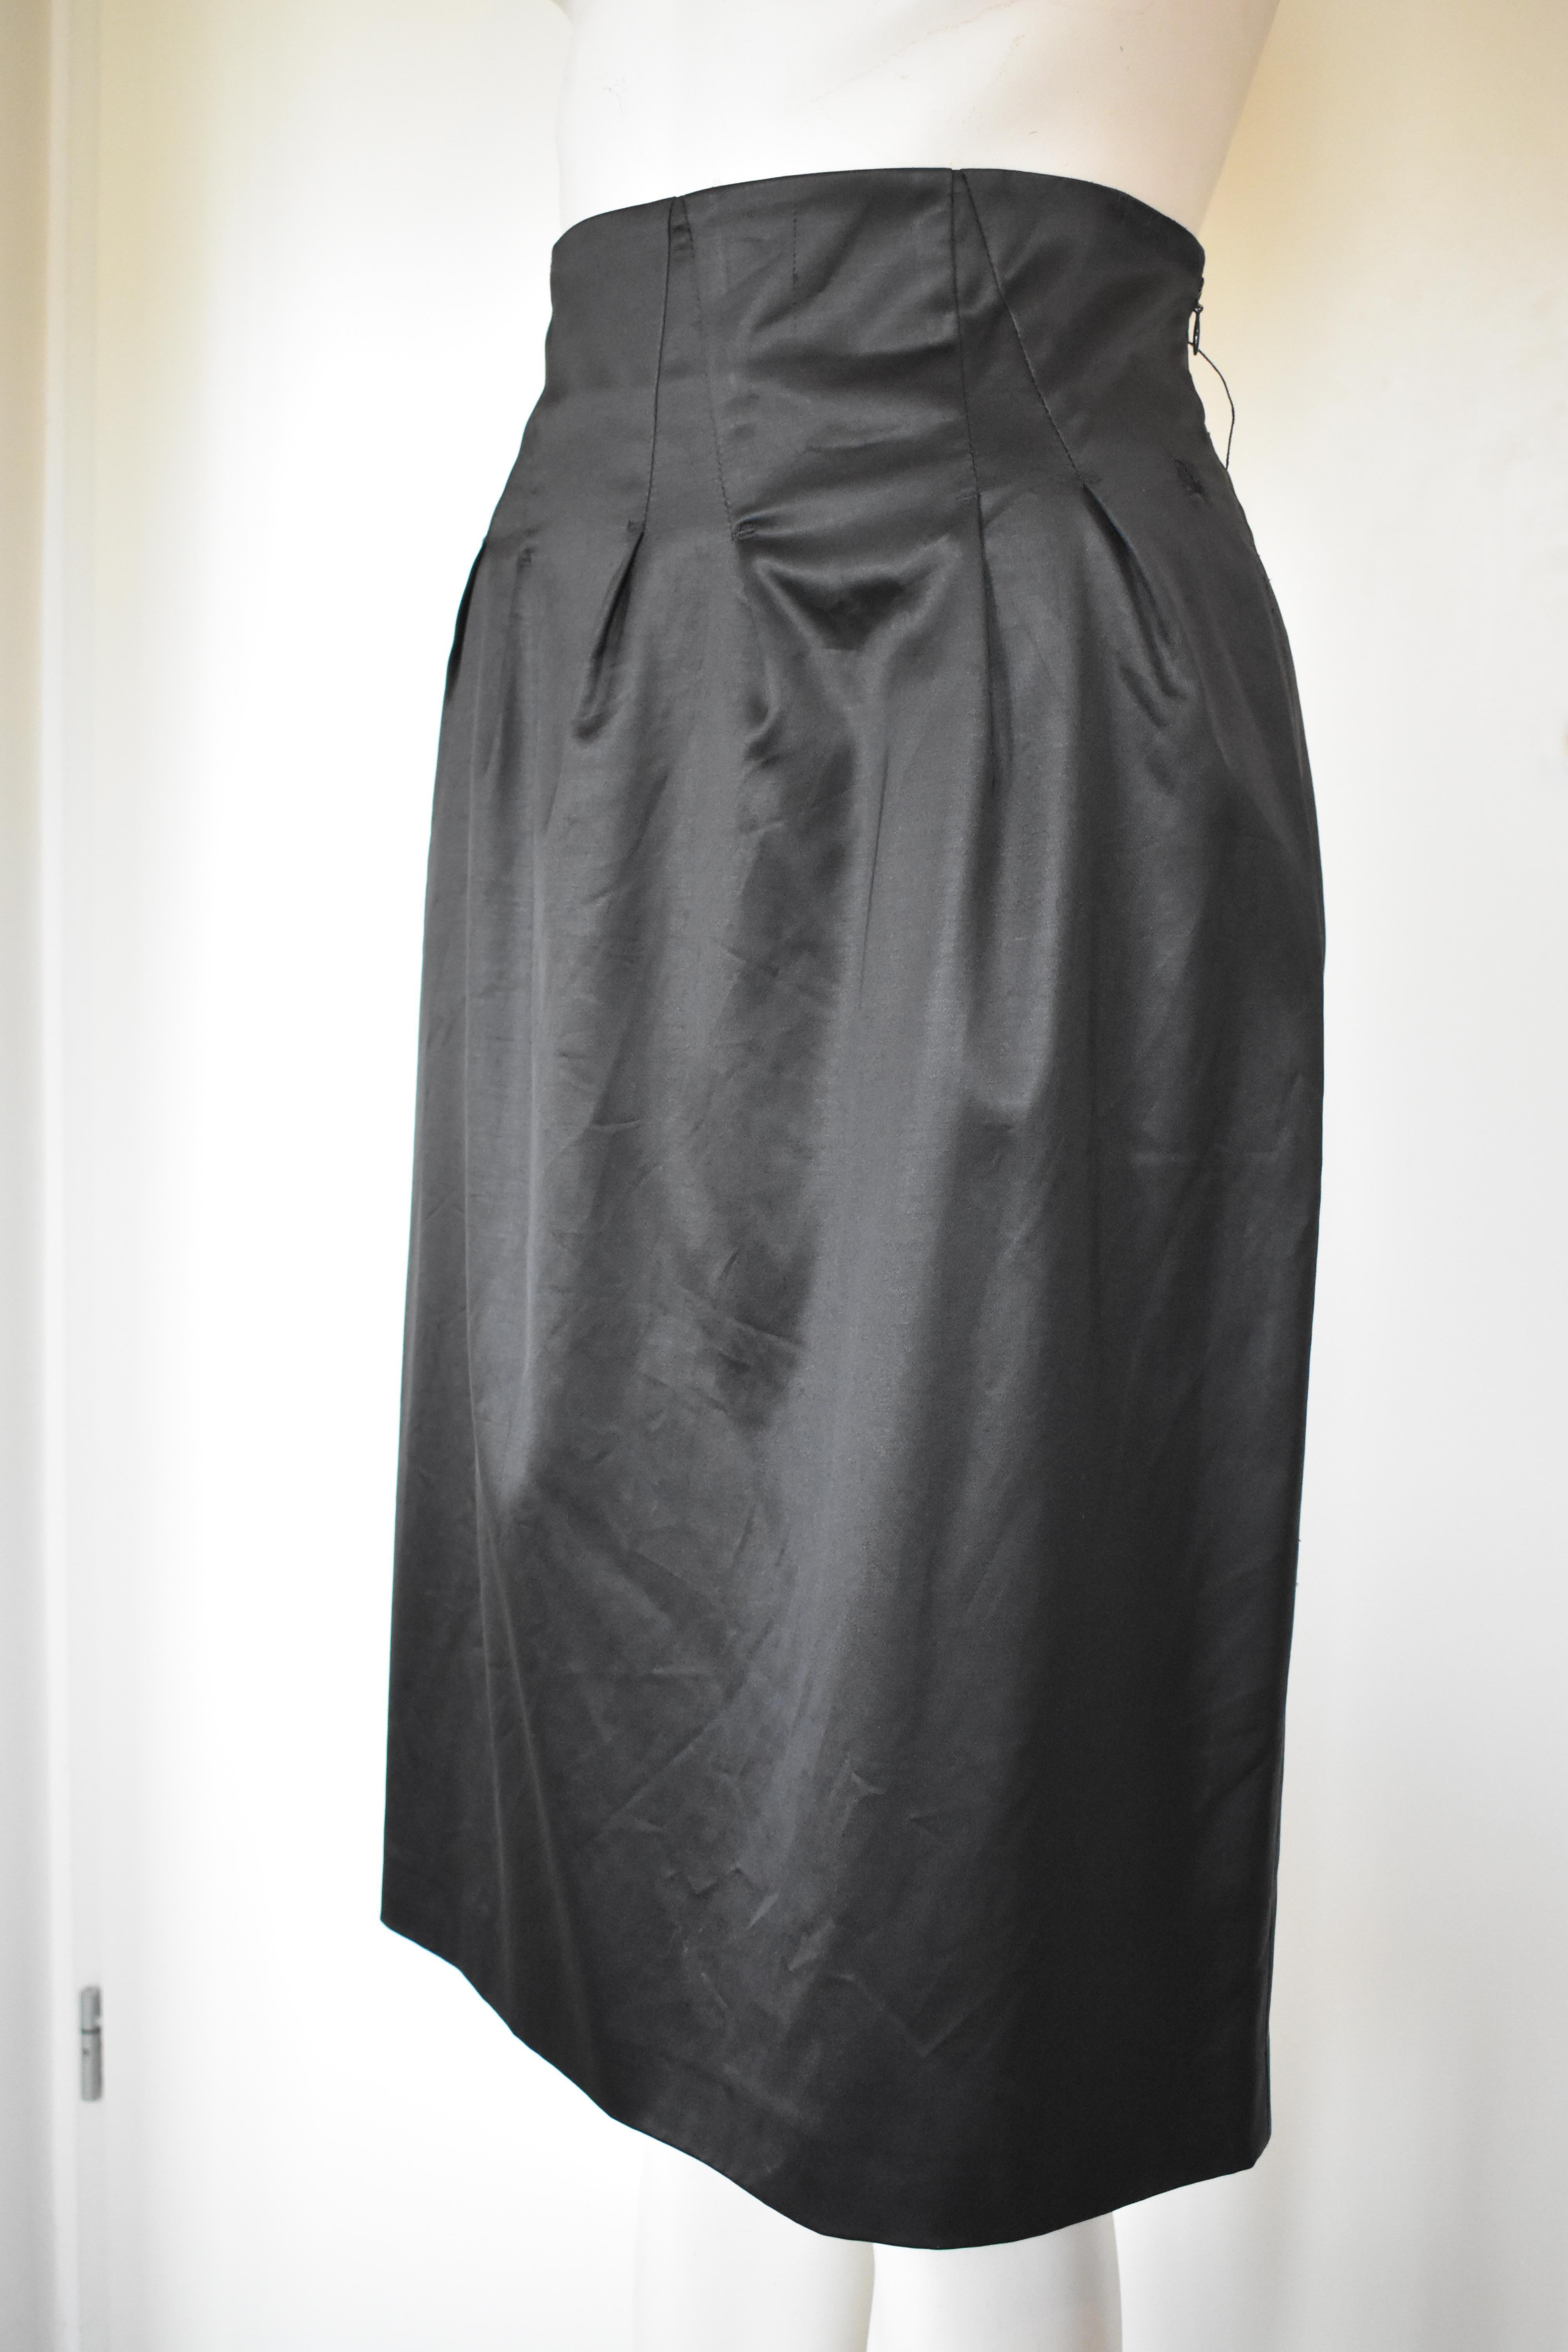 Black Burberry Satin High Waist Skirt In Good Condition For Sale In Amsterdam, NL